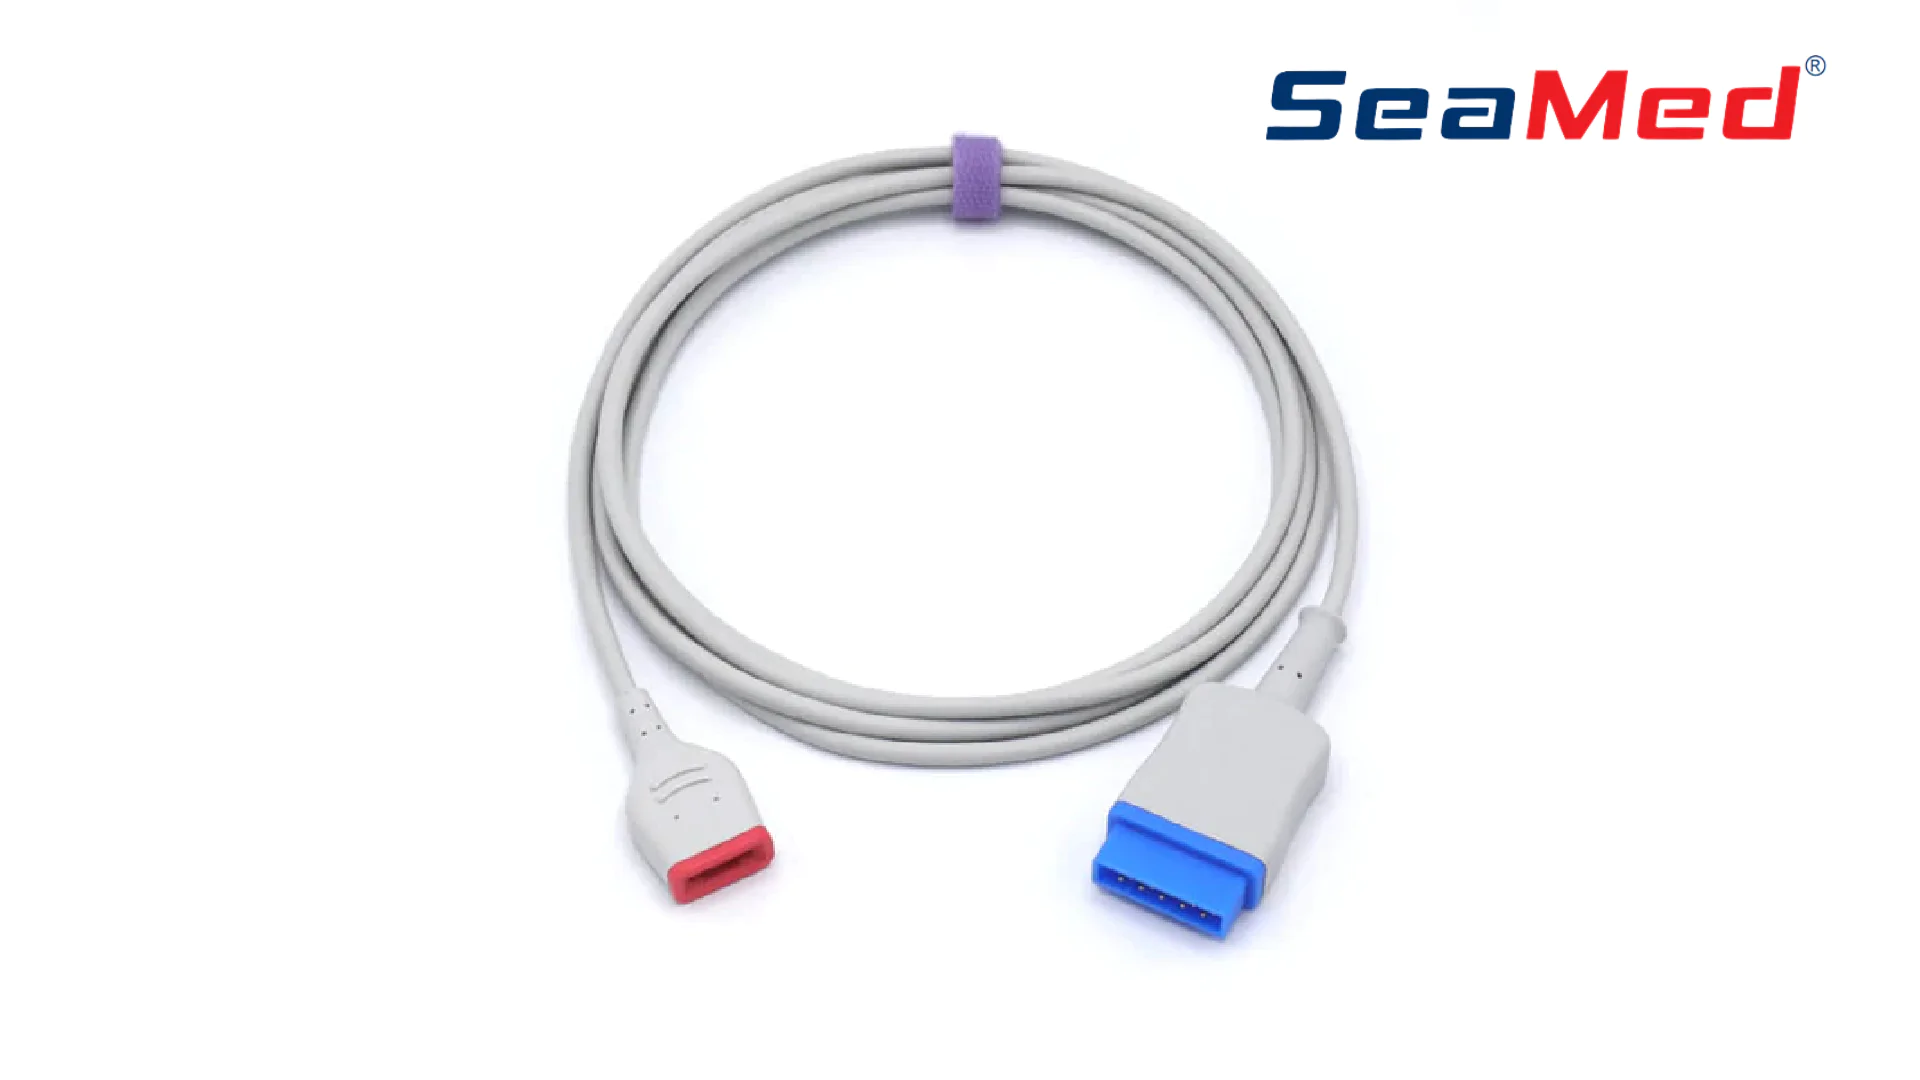 GE MASIMO RD COMPATIBLE SPO2 EXTENSION CABLE